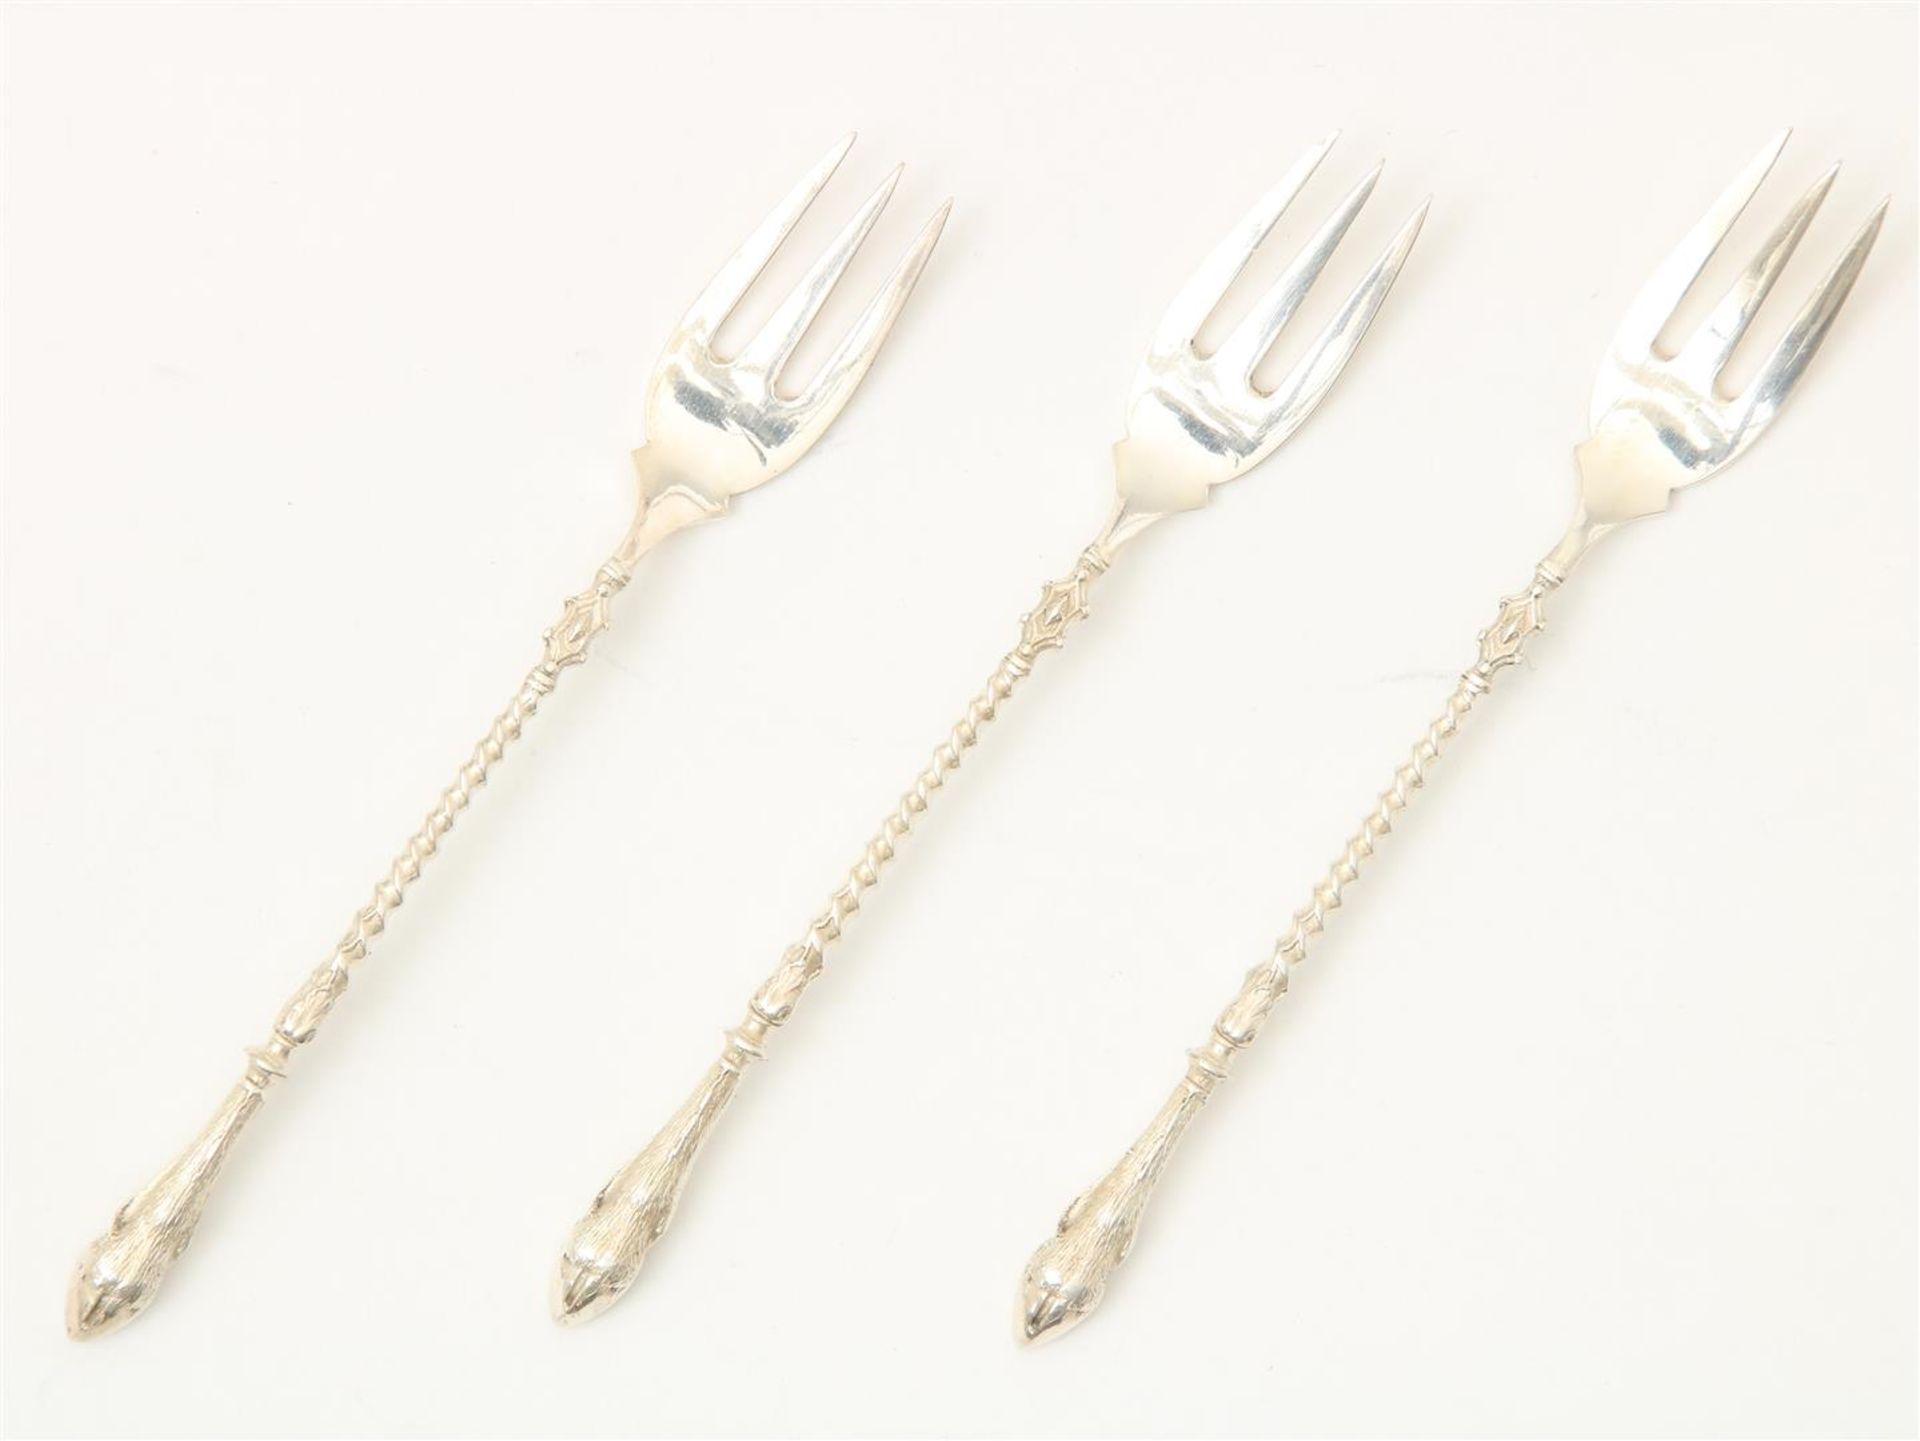 12 silver cake forks with goat legs and 6 silver mustard spoons with twisted handles - Image 2 of 4